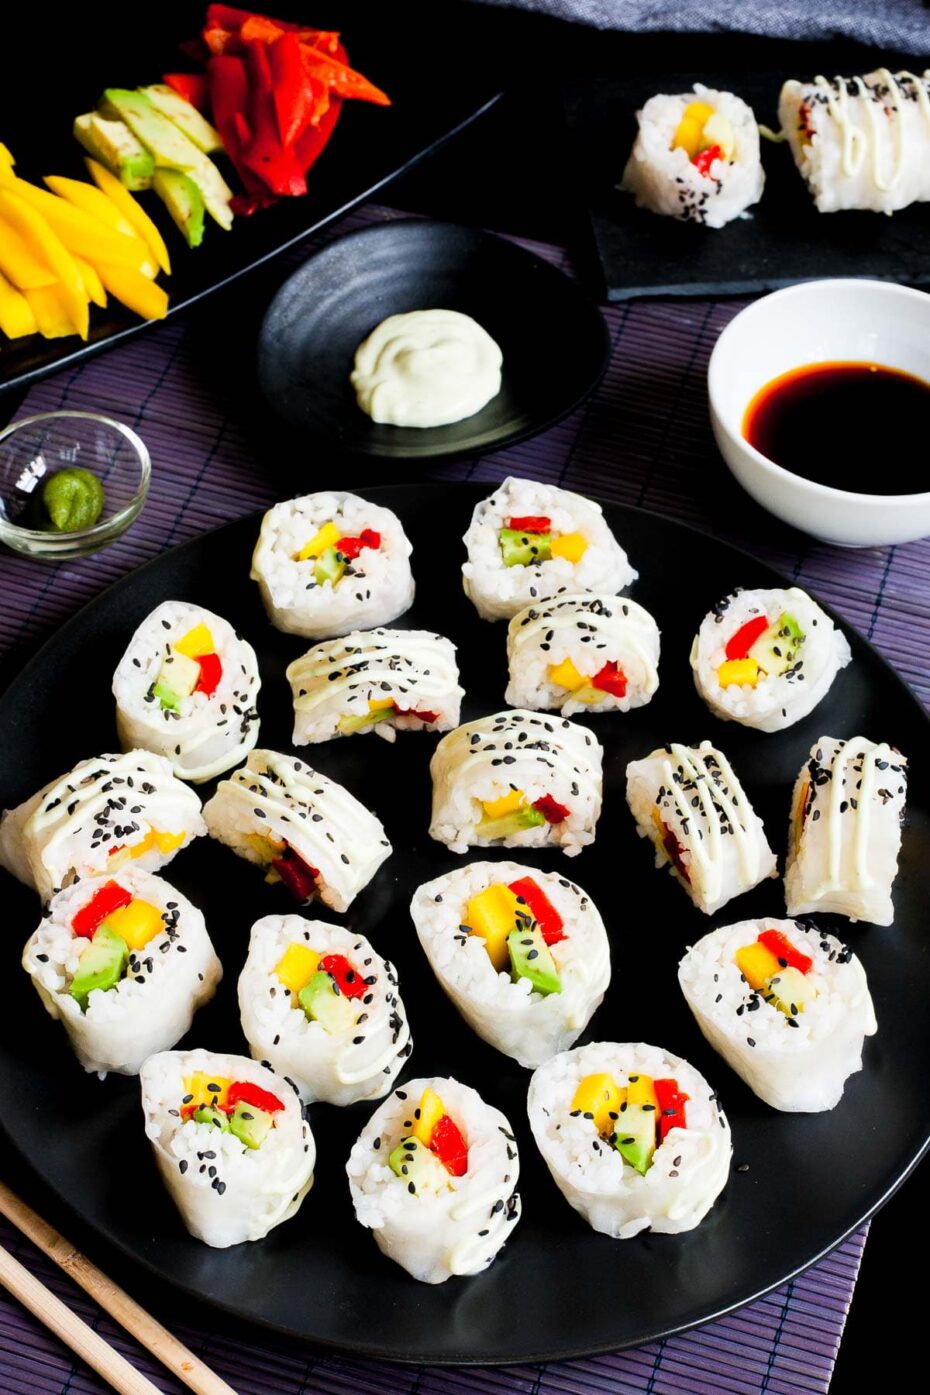 Large black round plate with a lot of white sushi rolls with colorful filling sprinkled with tiny black sesame seeds. Condiment bowls are around it.